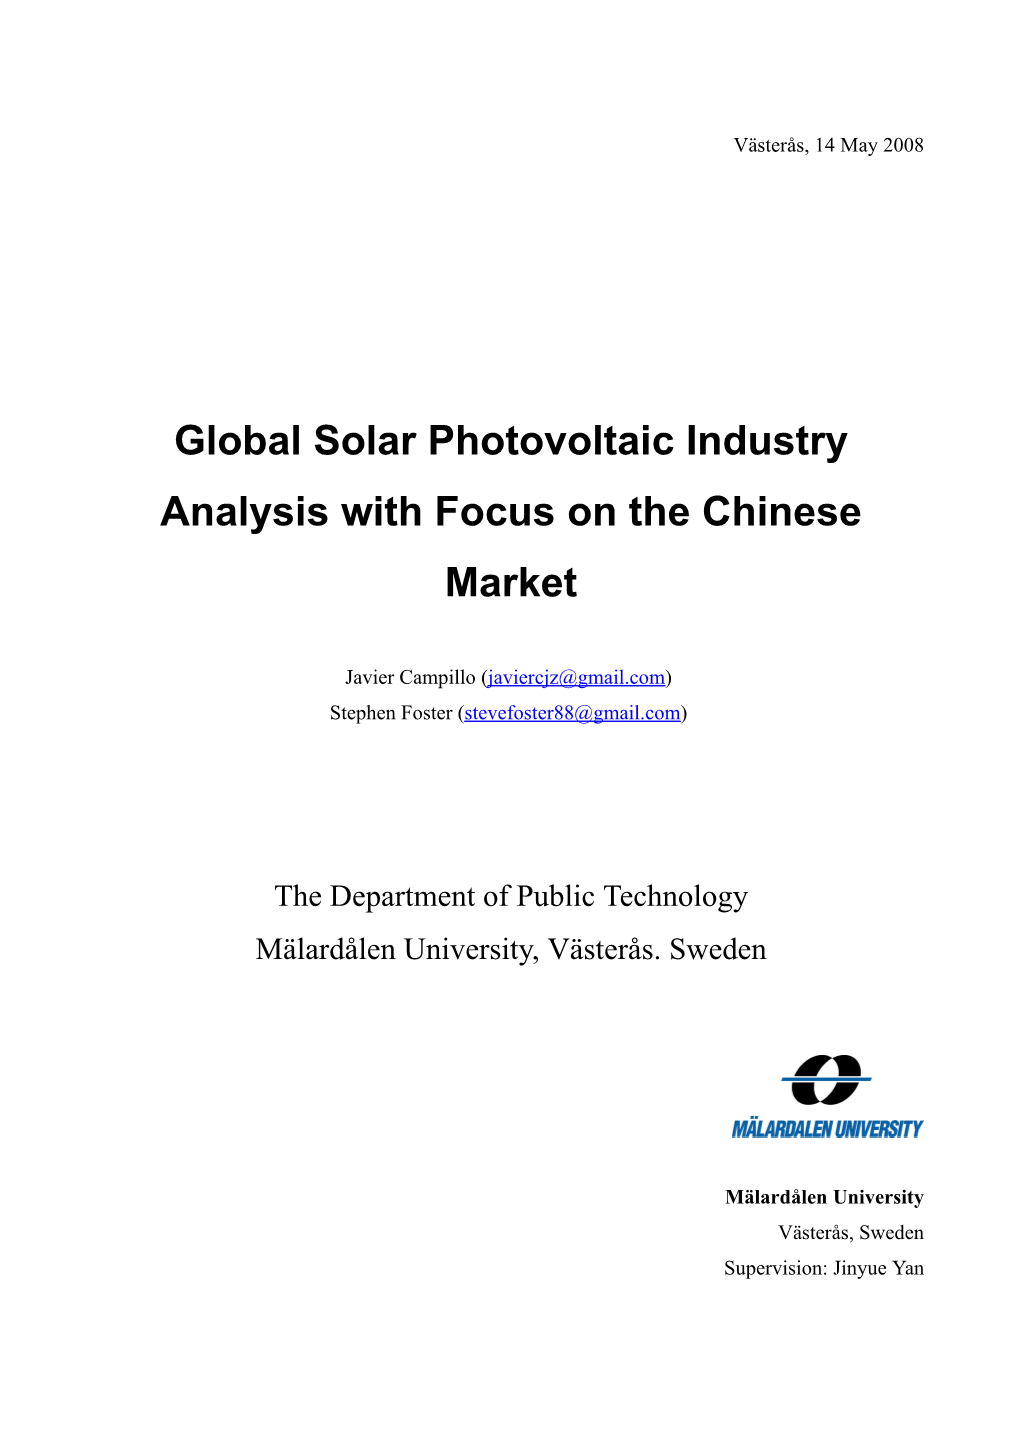 Global Solar Photovoltaic Industry Analysis with Focus on the Chinese Market